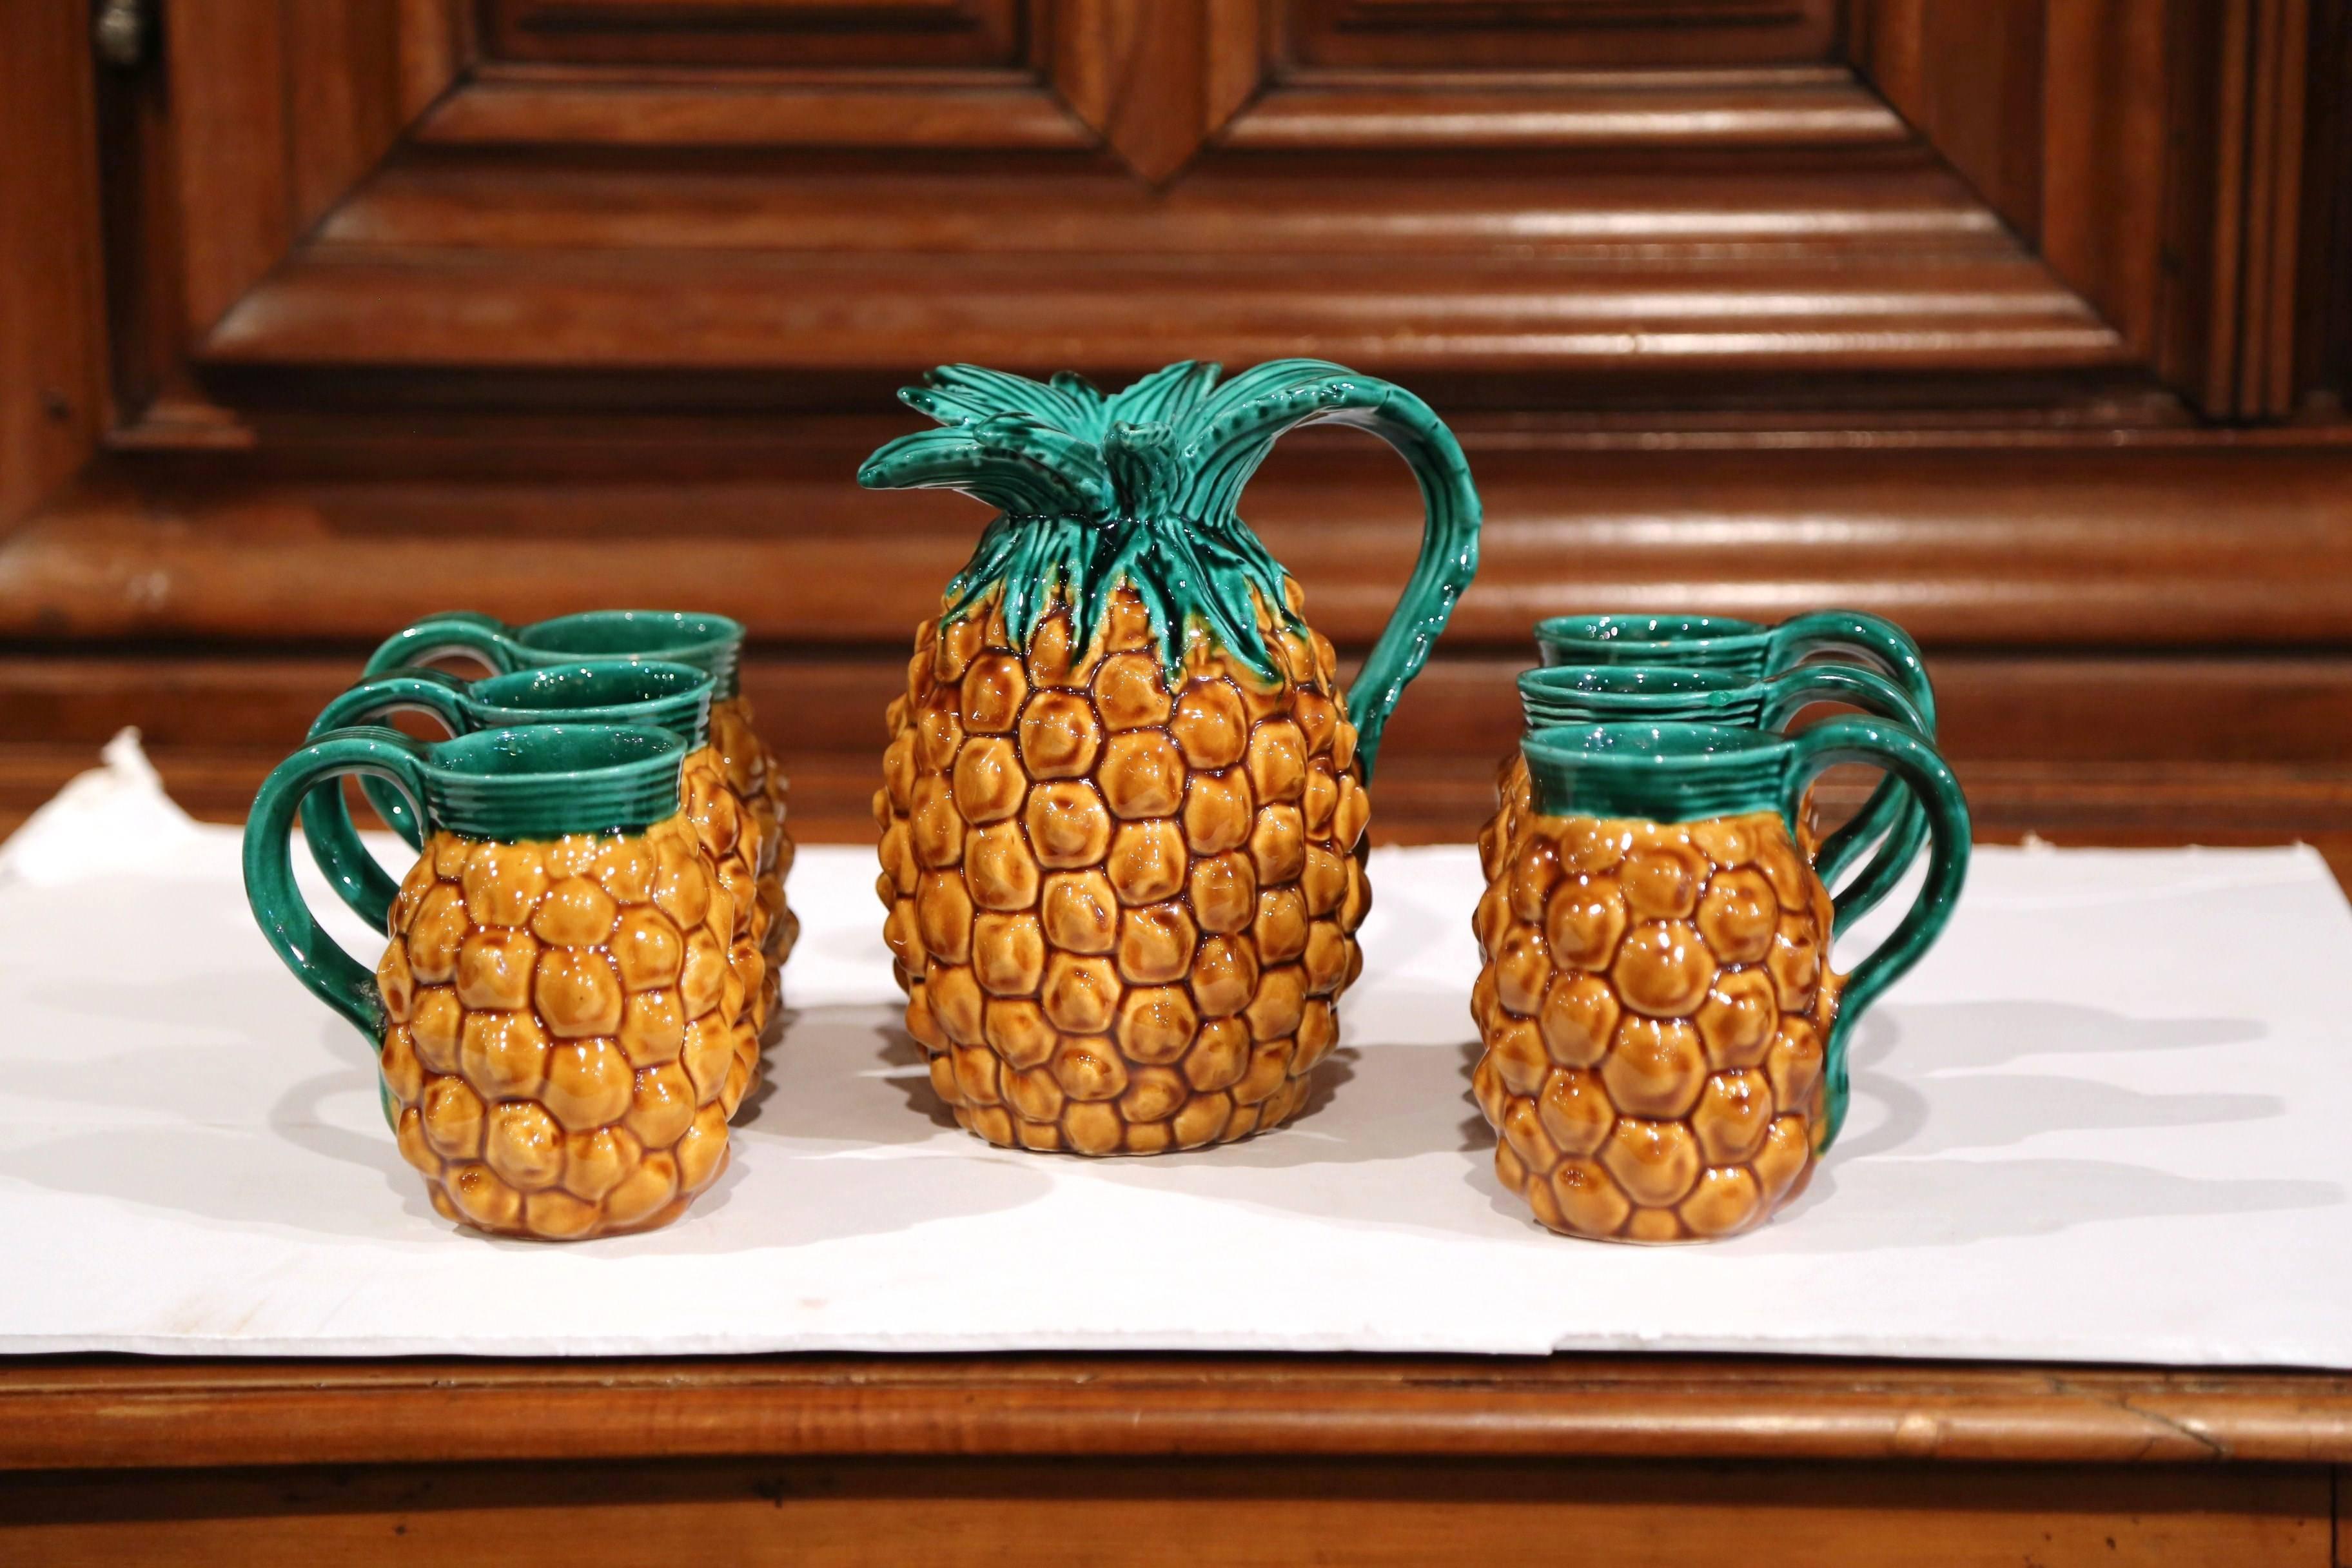 This novelty ceramic pineapple set from France is a must-have for summer! The sculptural, colorful, Majolica drinking set was crafted in the south of France, circa 1950. The playful barbotine set features six mugs with a handle and a matching